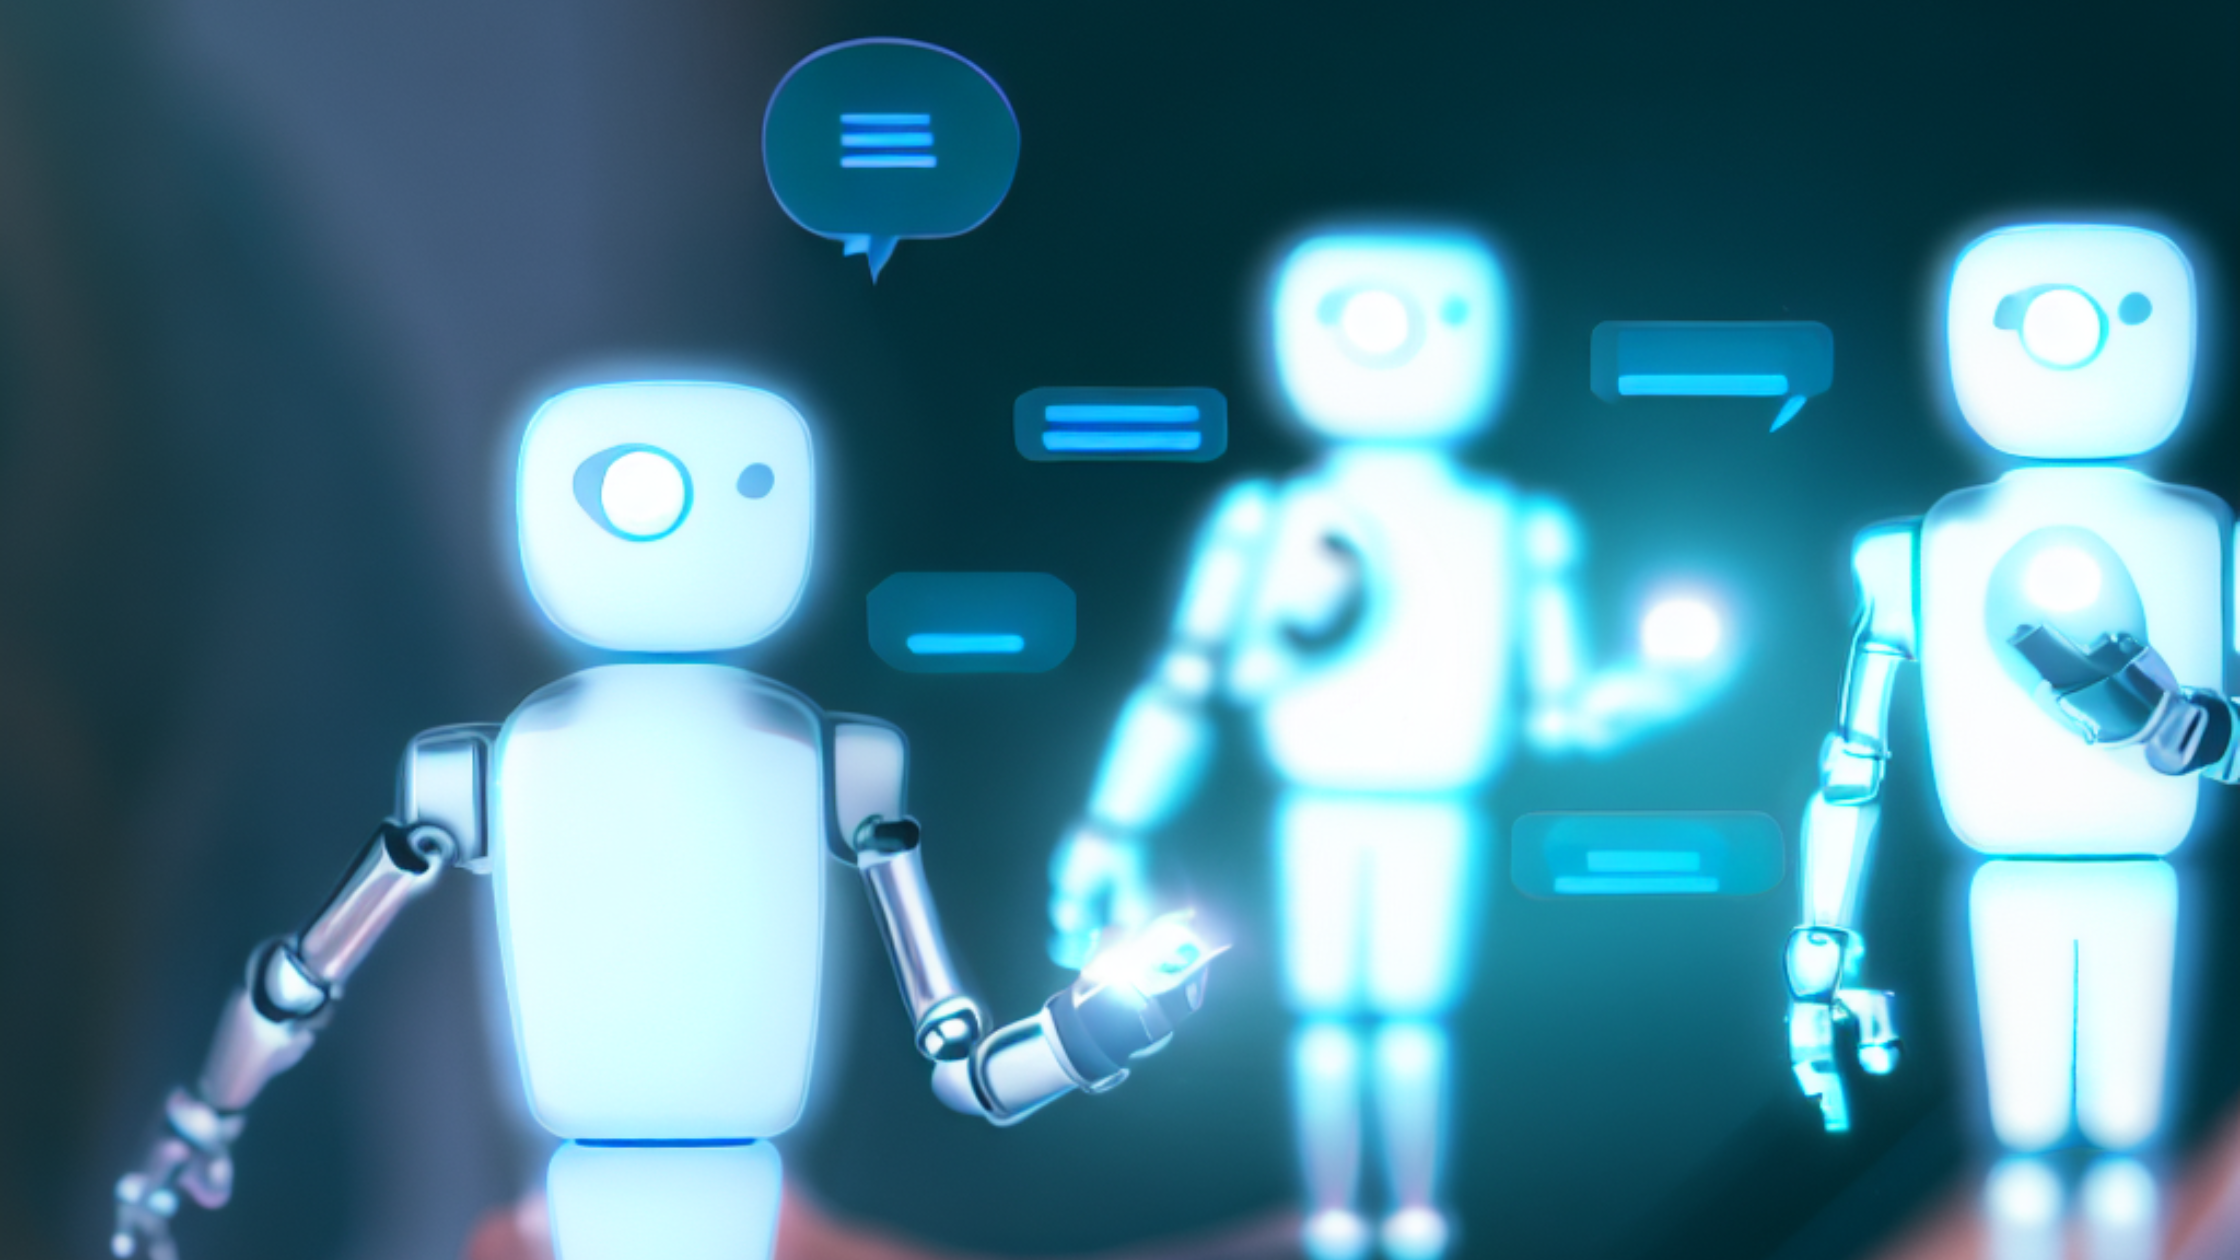 Chatbots for HR : 5 Ways HR’s Can Use Bots